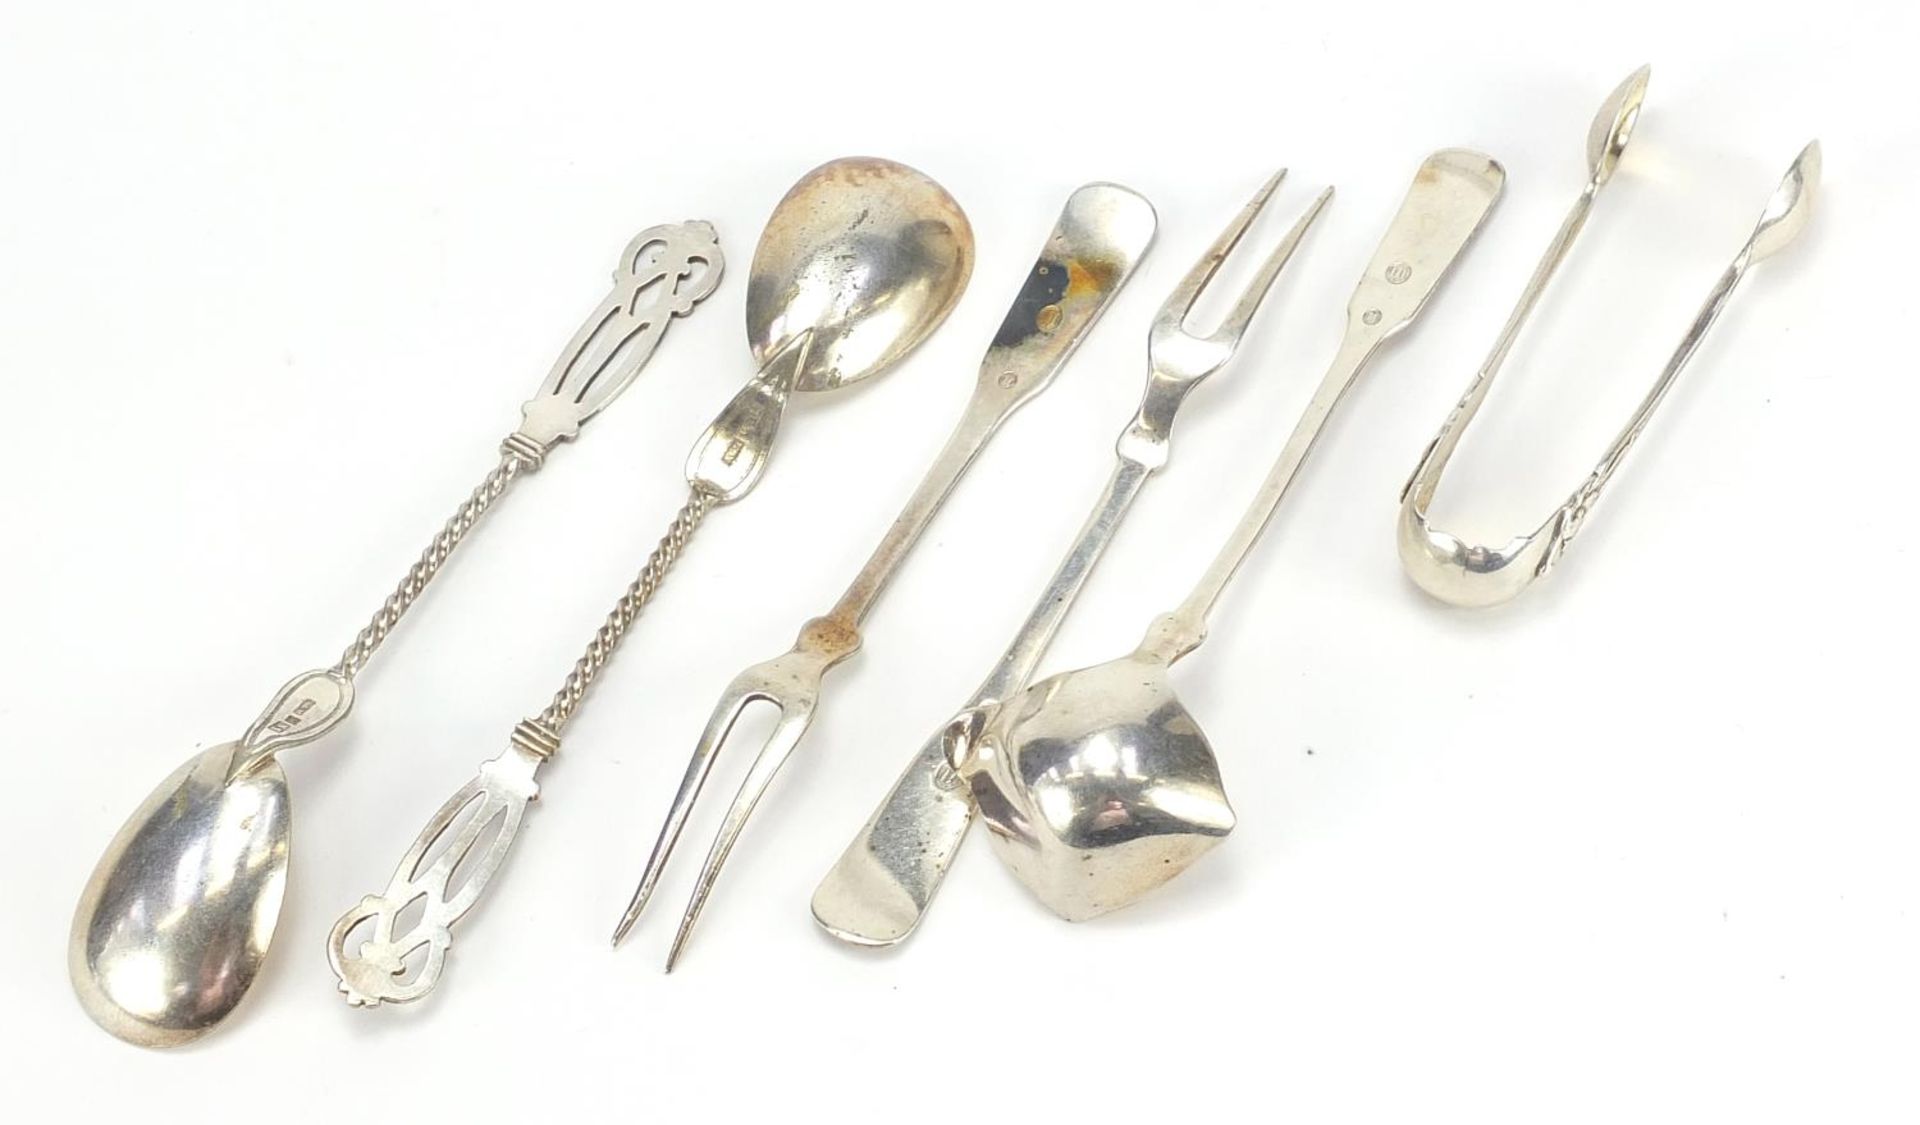 Danish silver and white metal cutlery including a toddy ladle, pair of forks and pair of sugar - Image 4 of 6